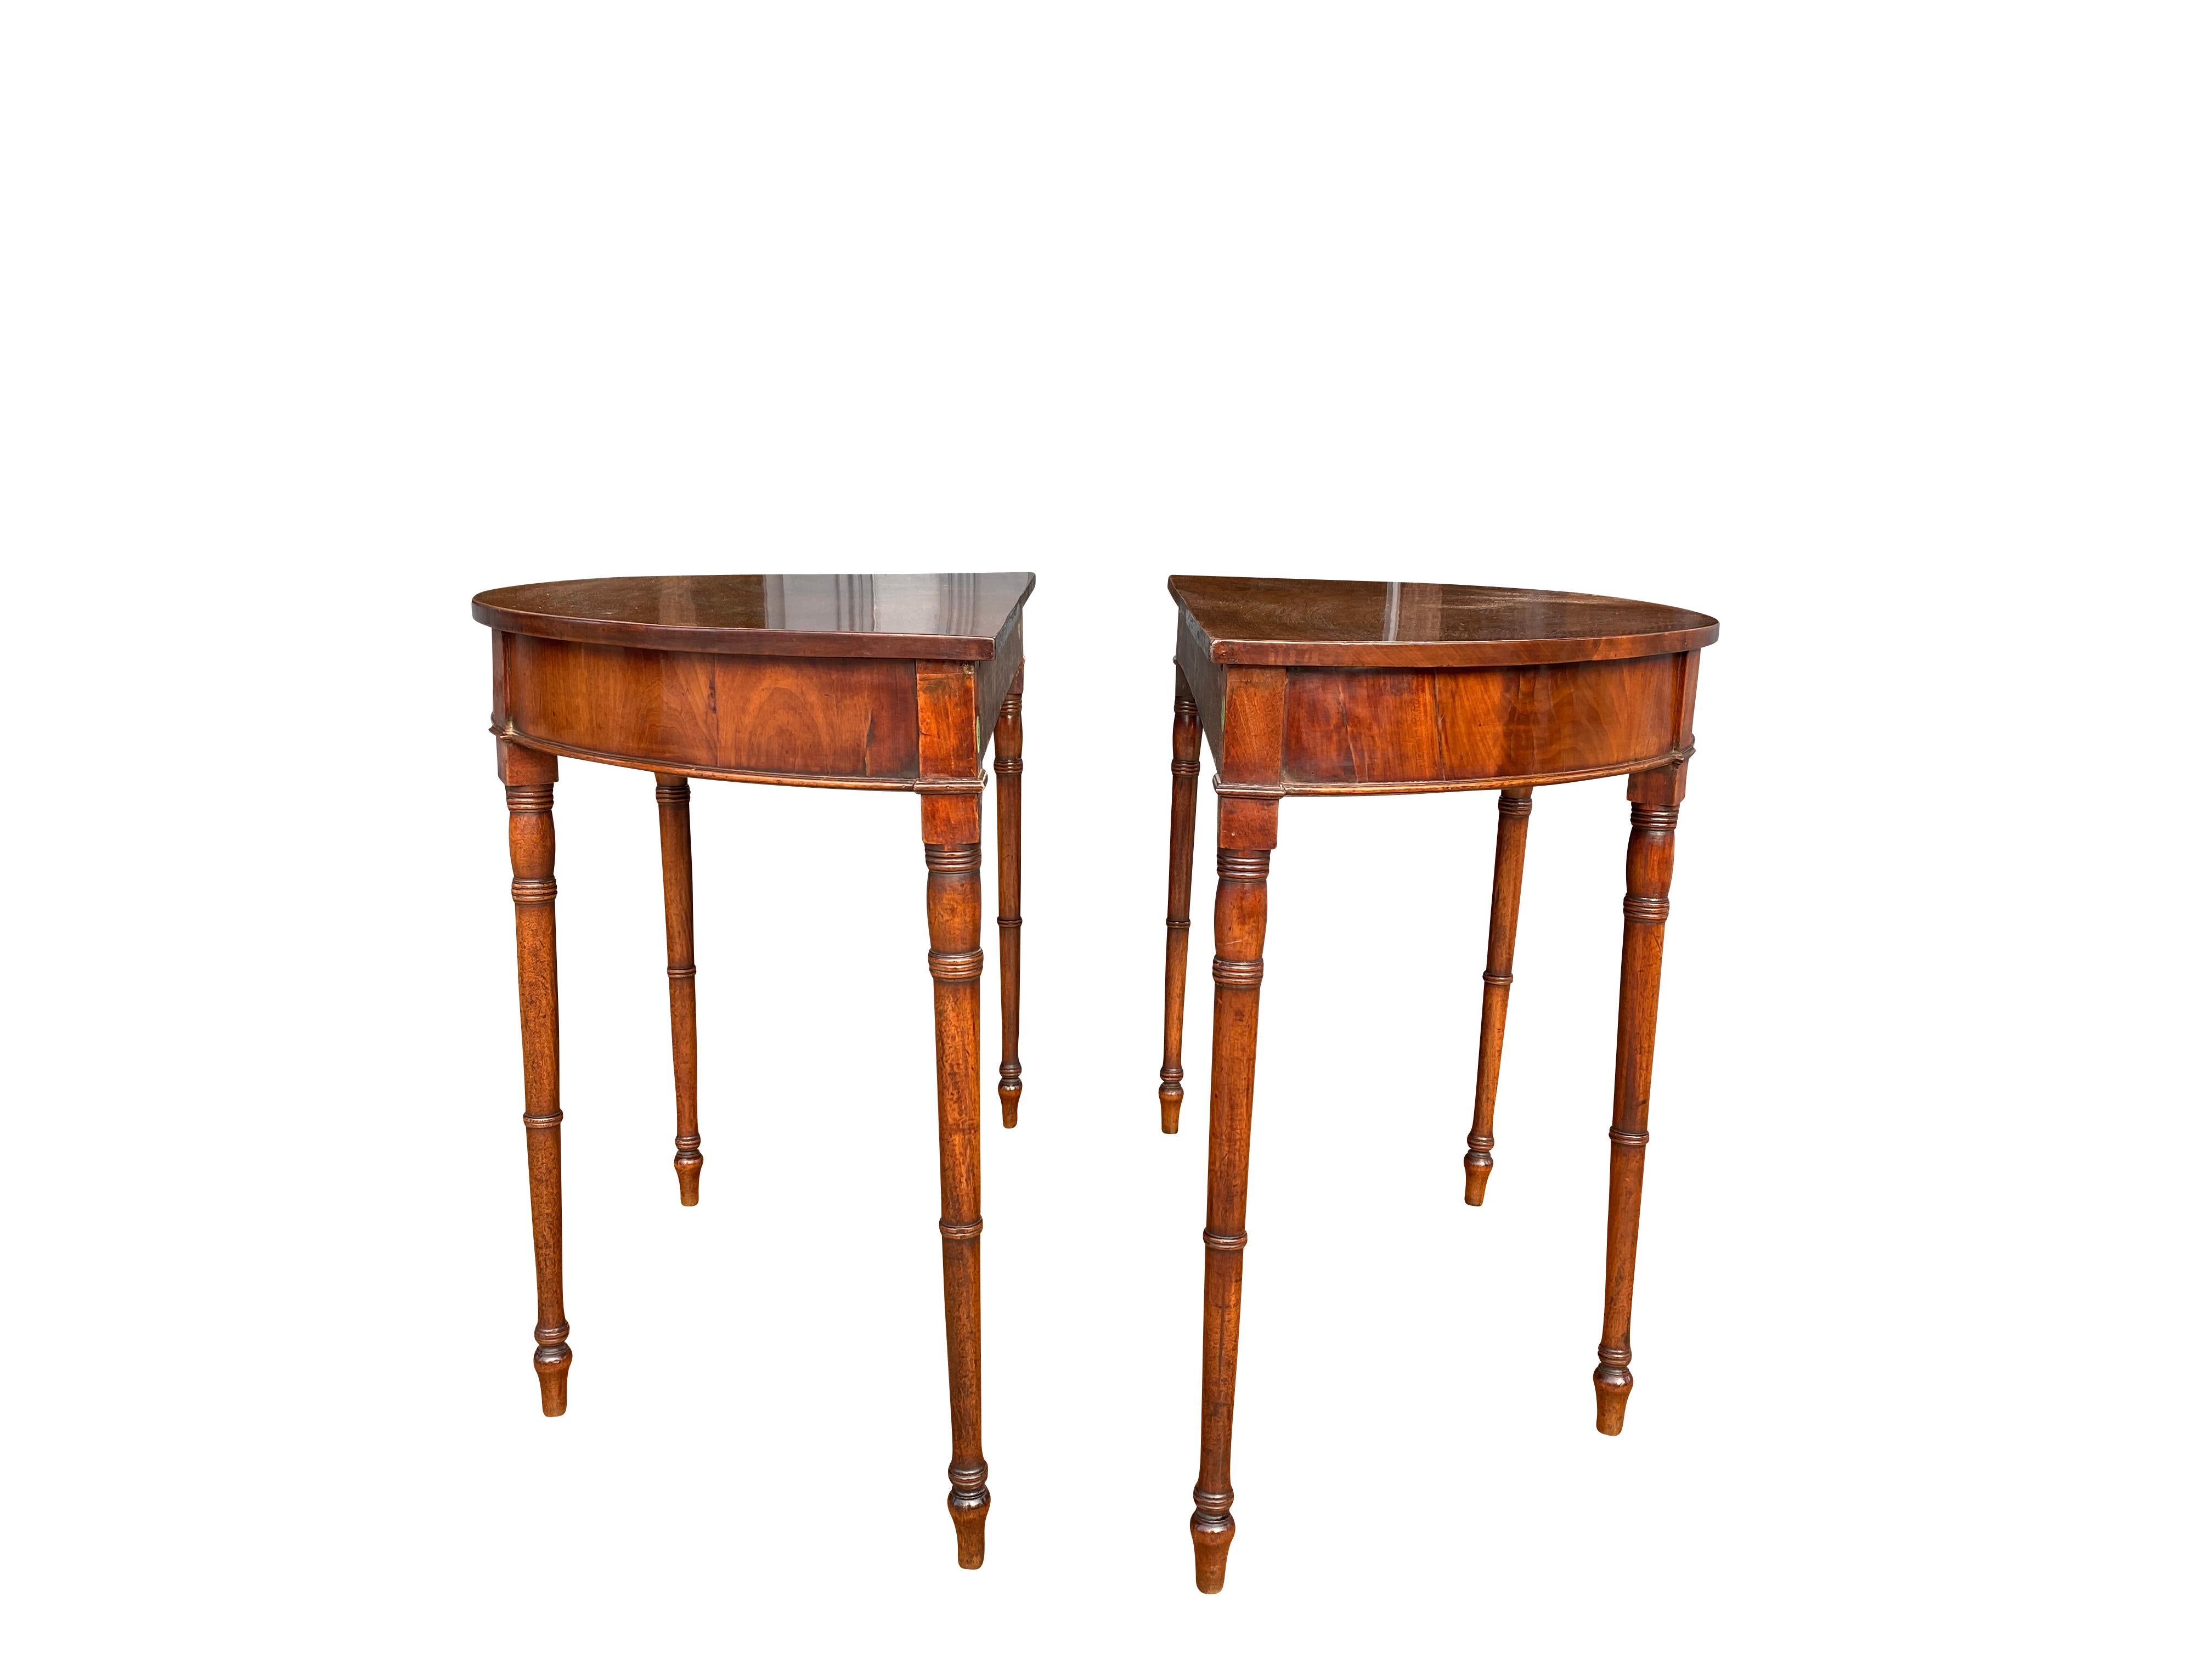 English Pair of Regency Mahogany Demilune Console Tables